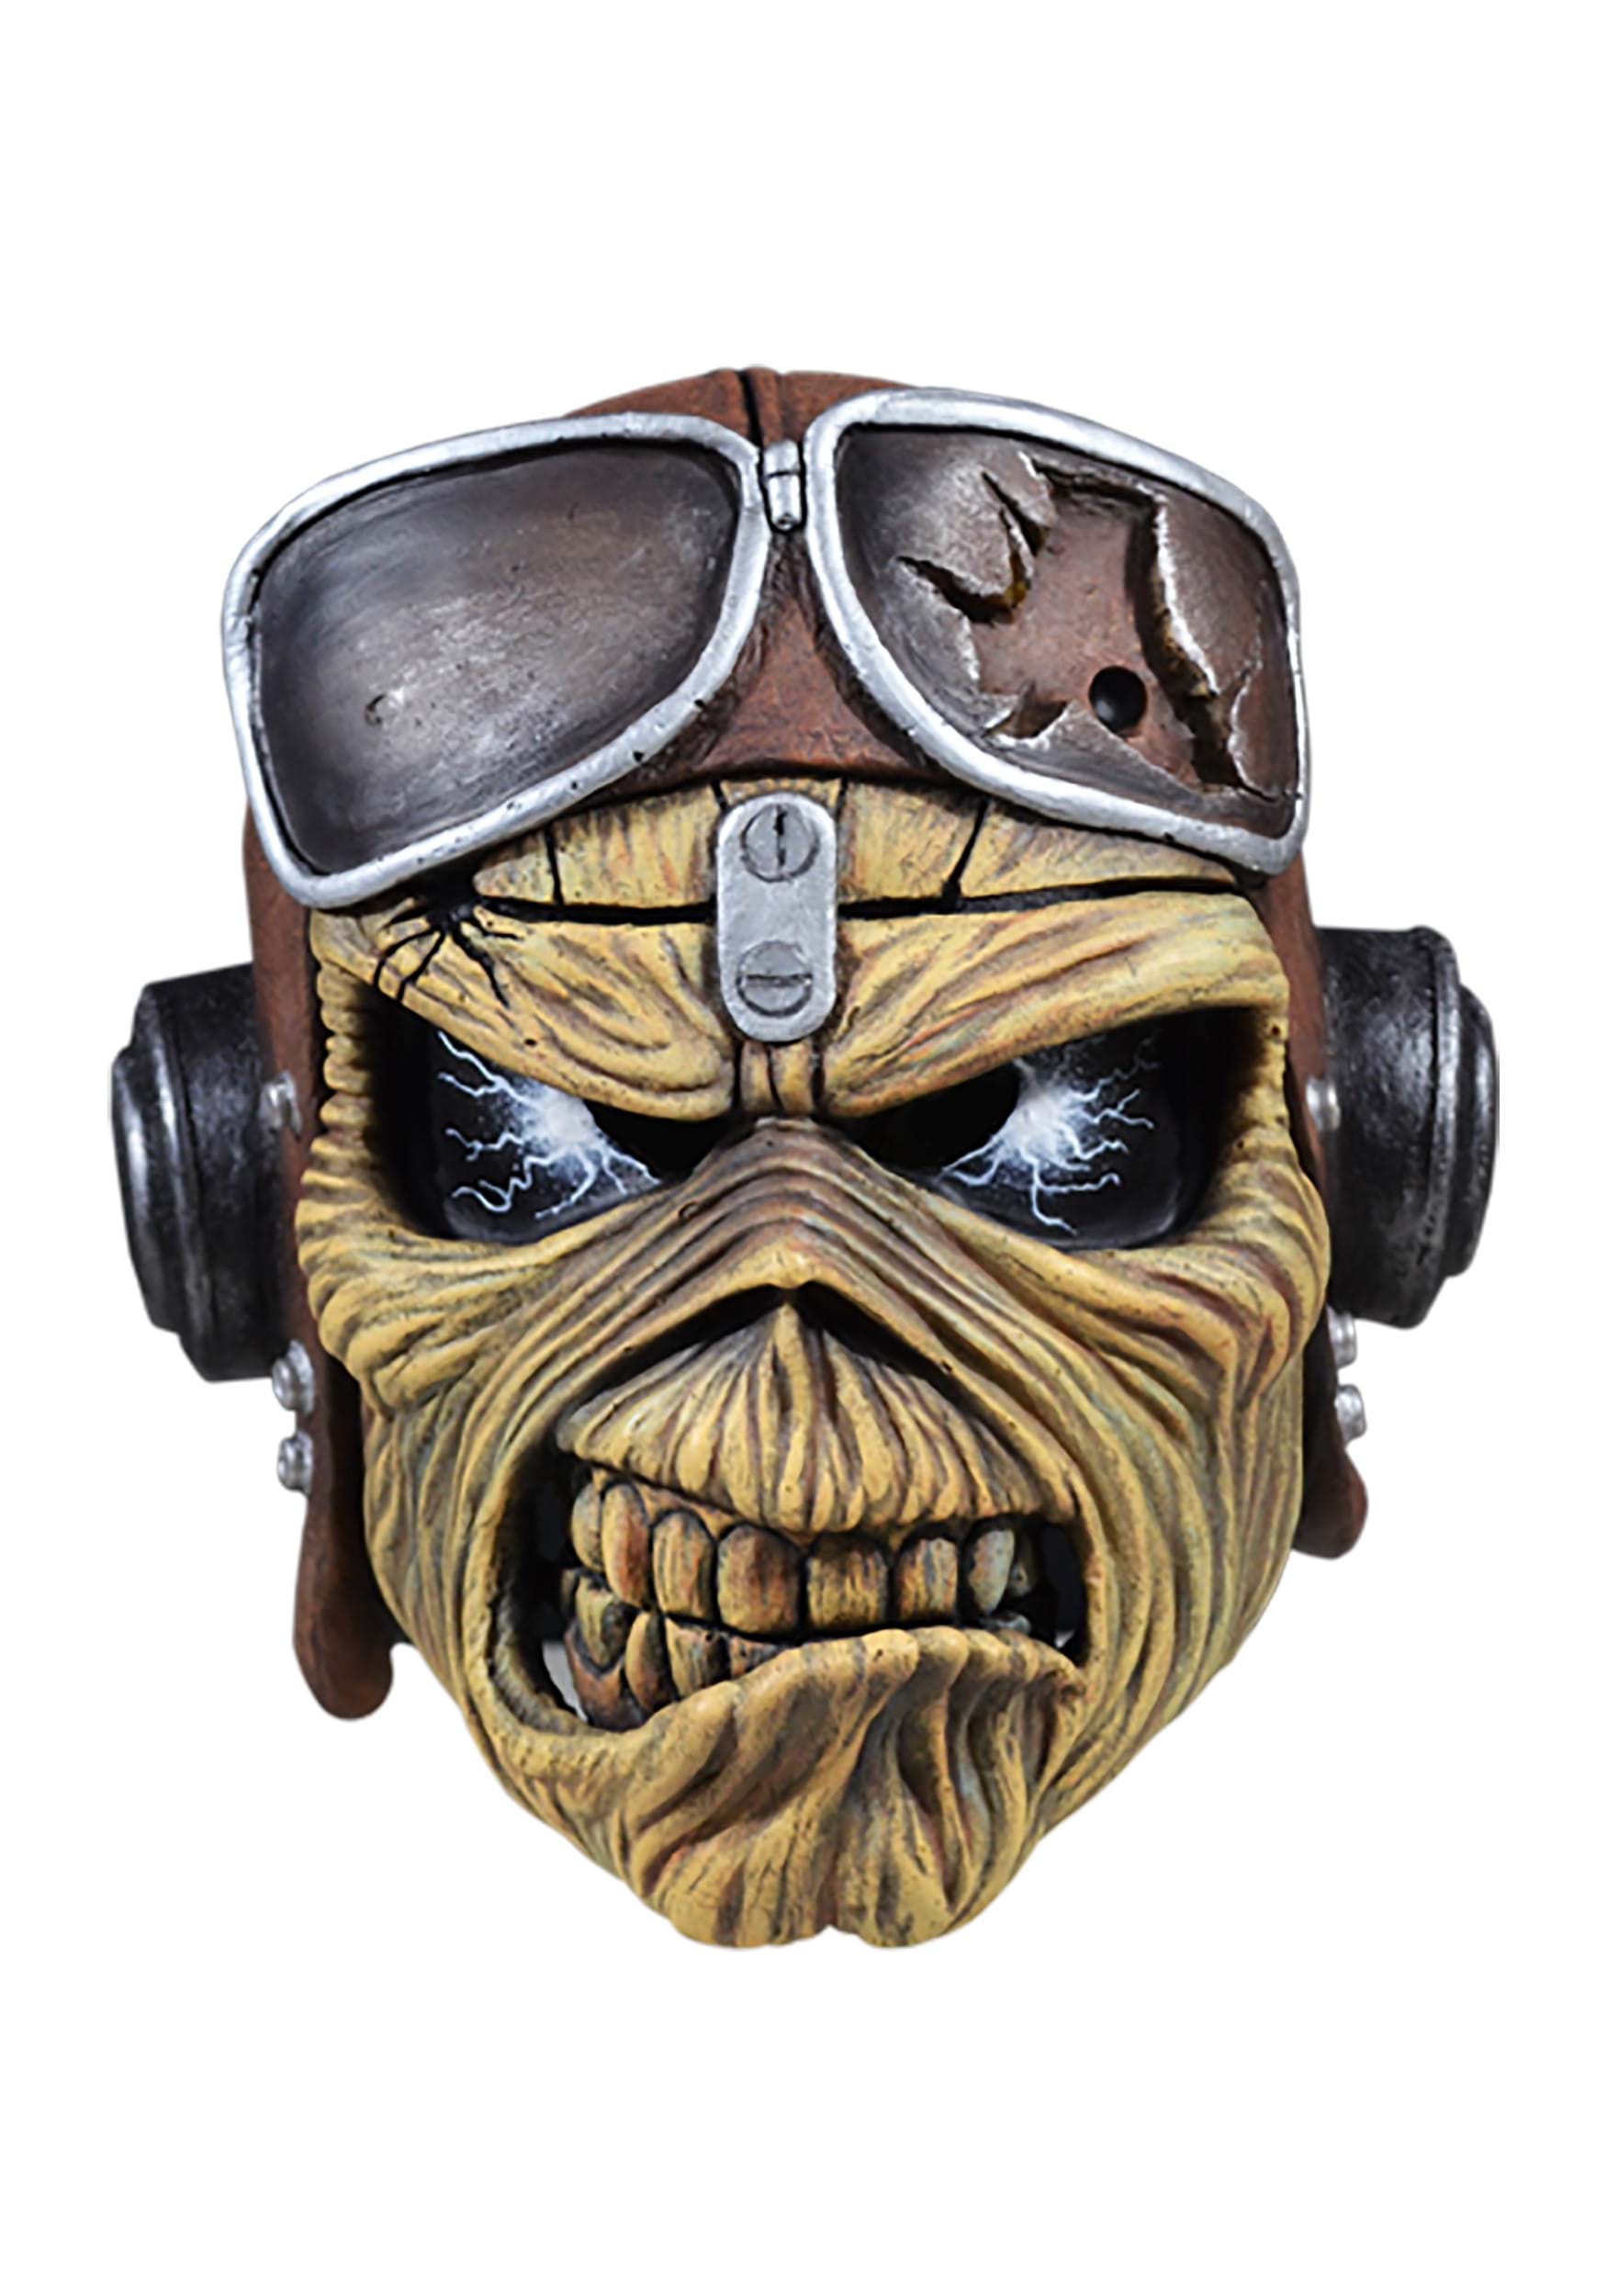 Aces High Iron Maiden Mask